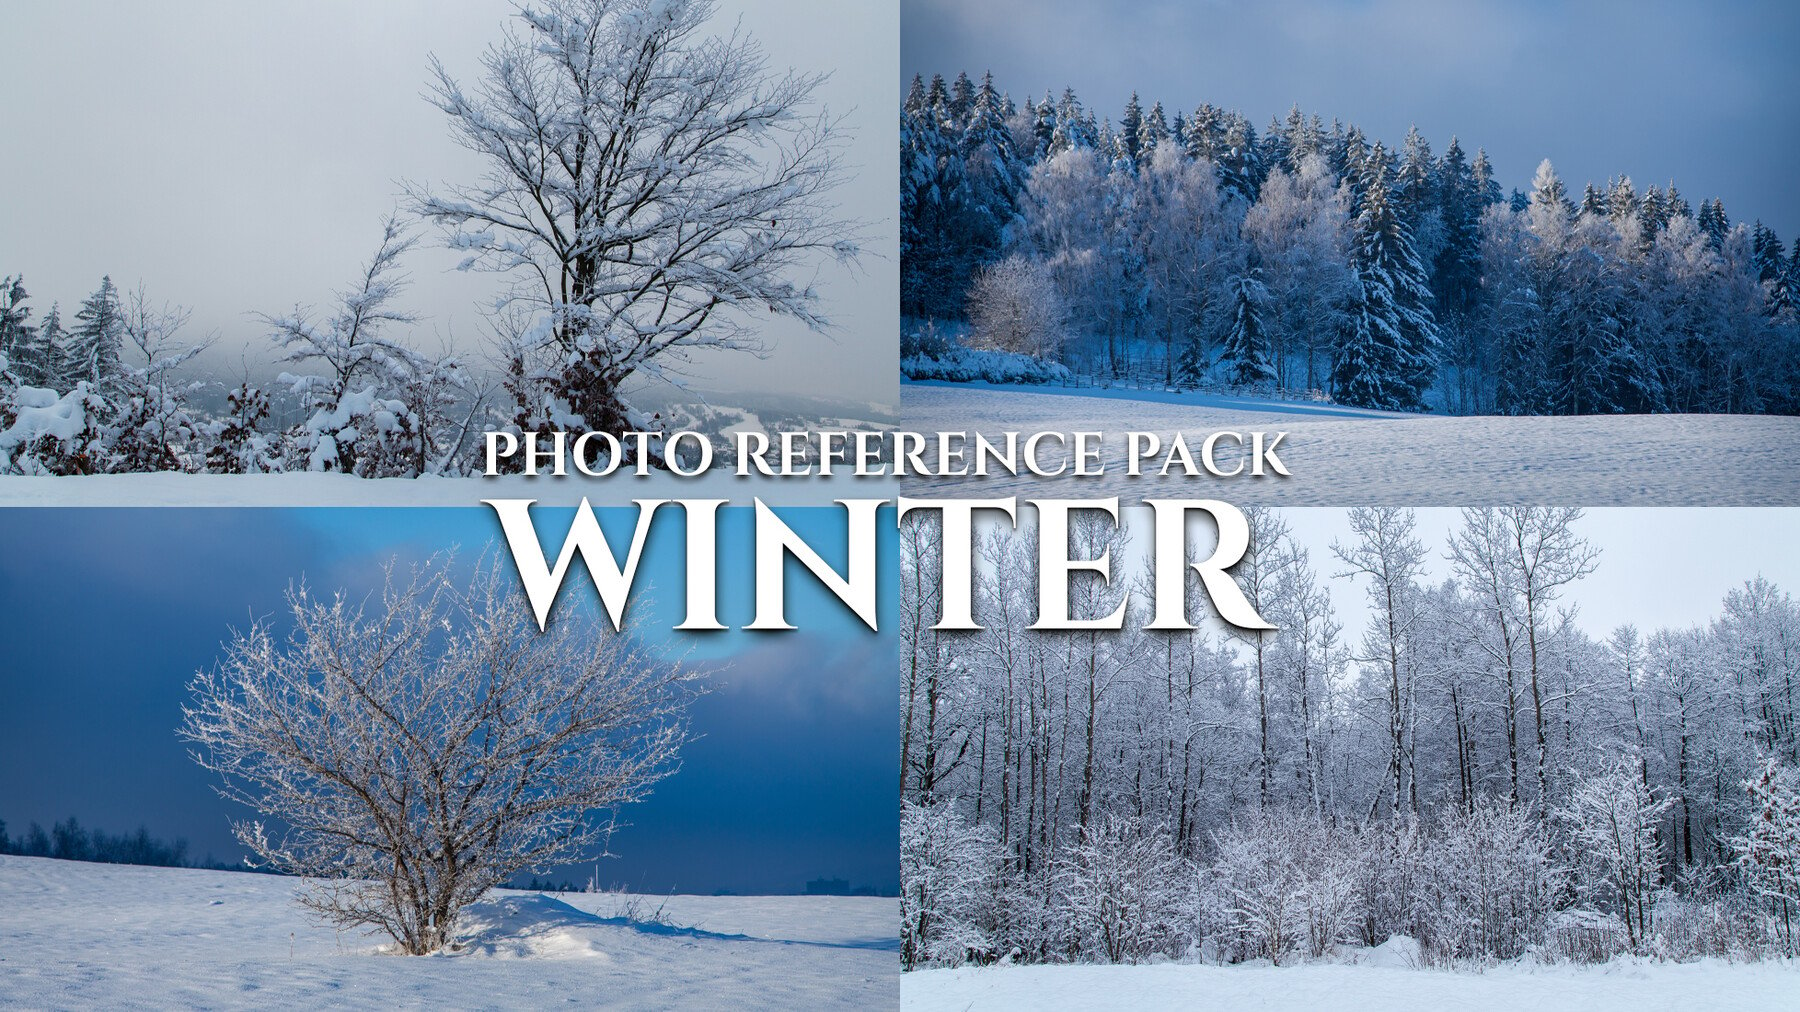 Winter-Photo Reference Pack For Artists 511 JPEGs